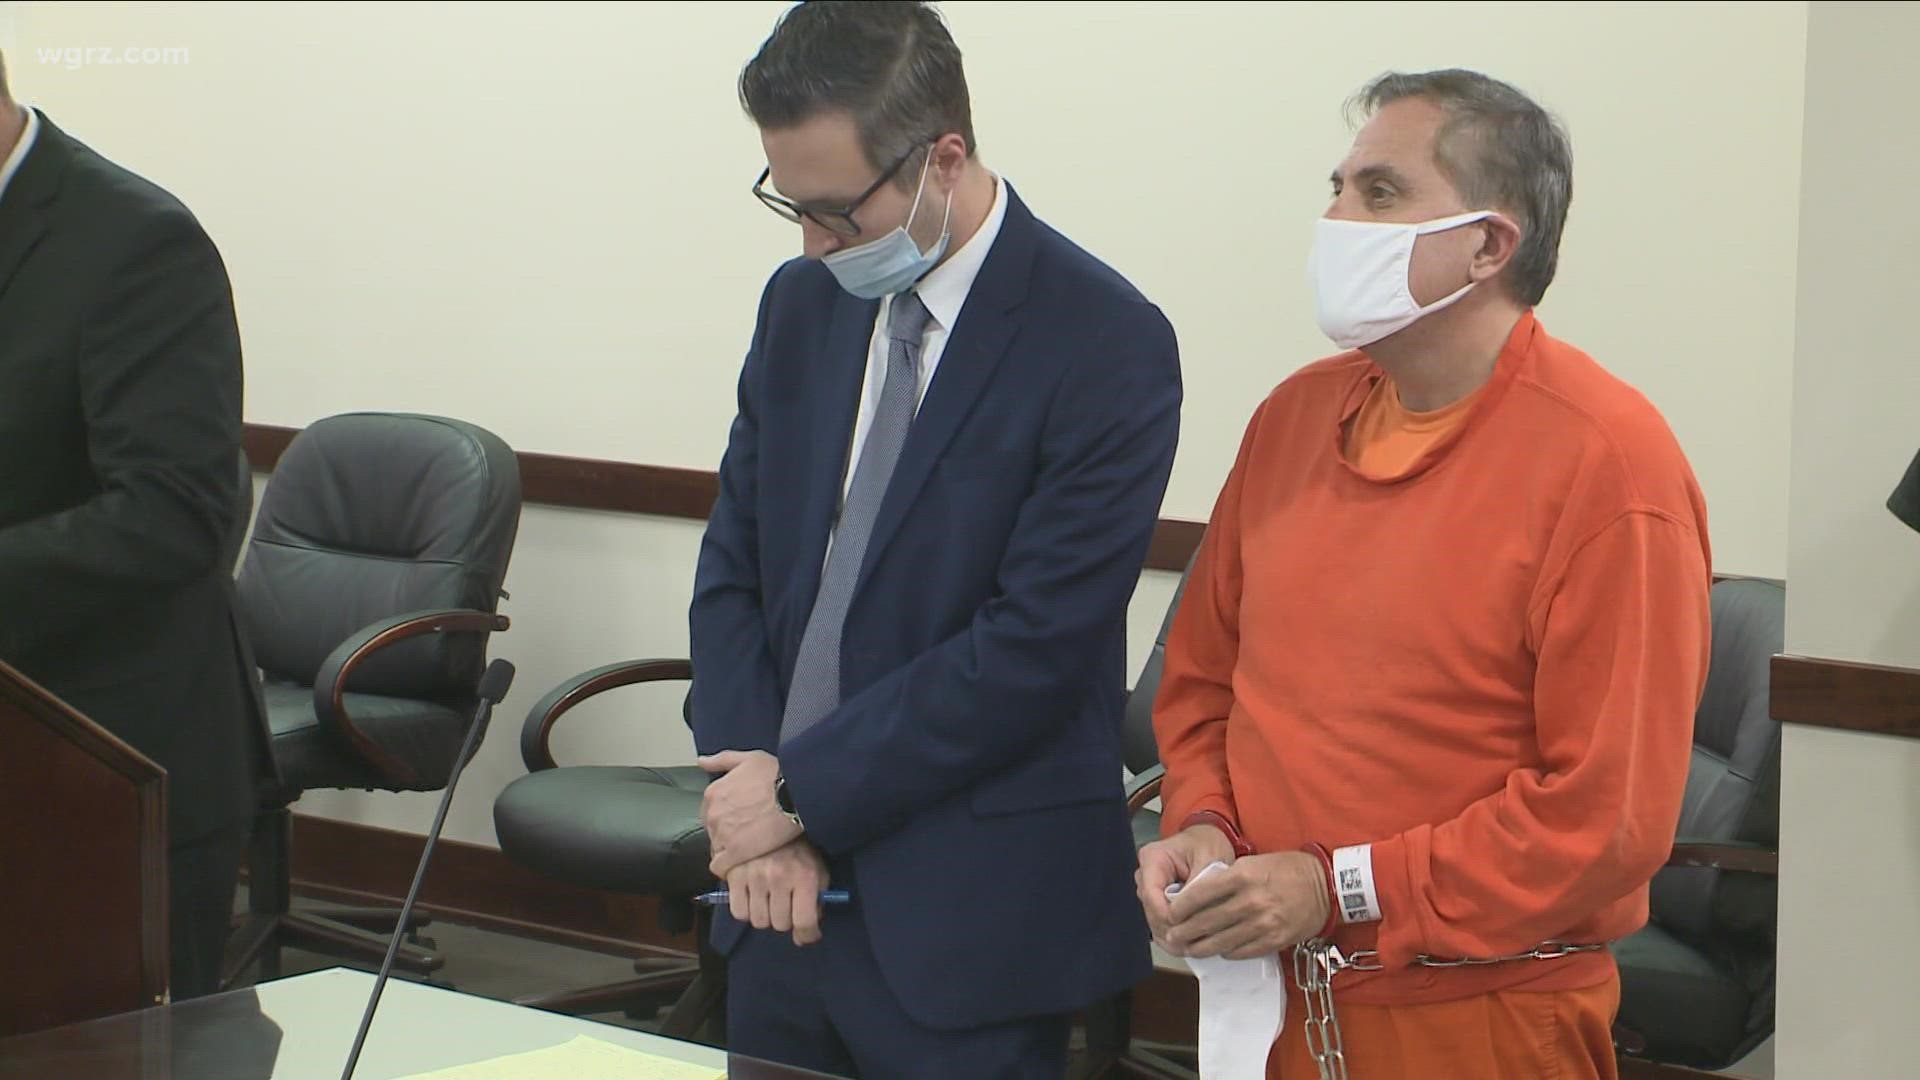 The former Erie County Democratic chair appeared in court in handcuffs and an orange jail jumpsuit.